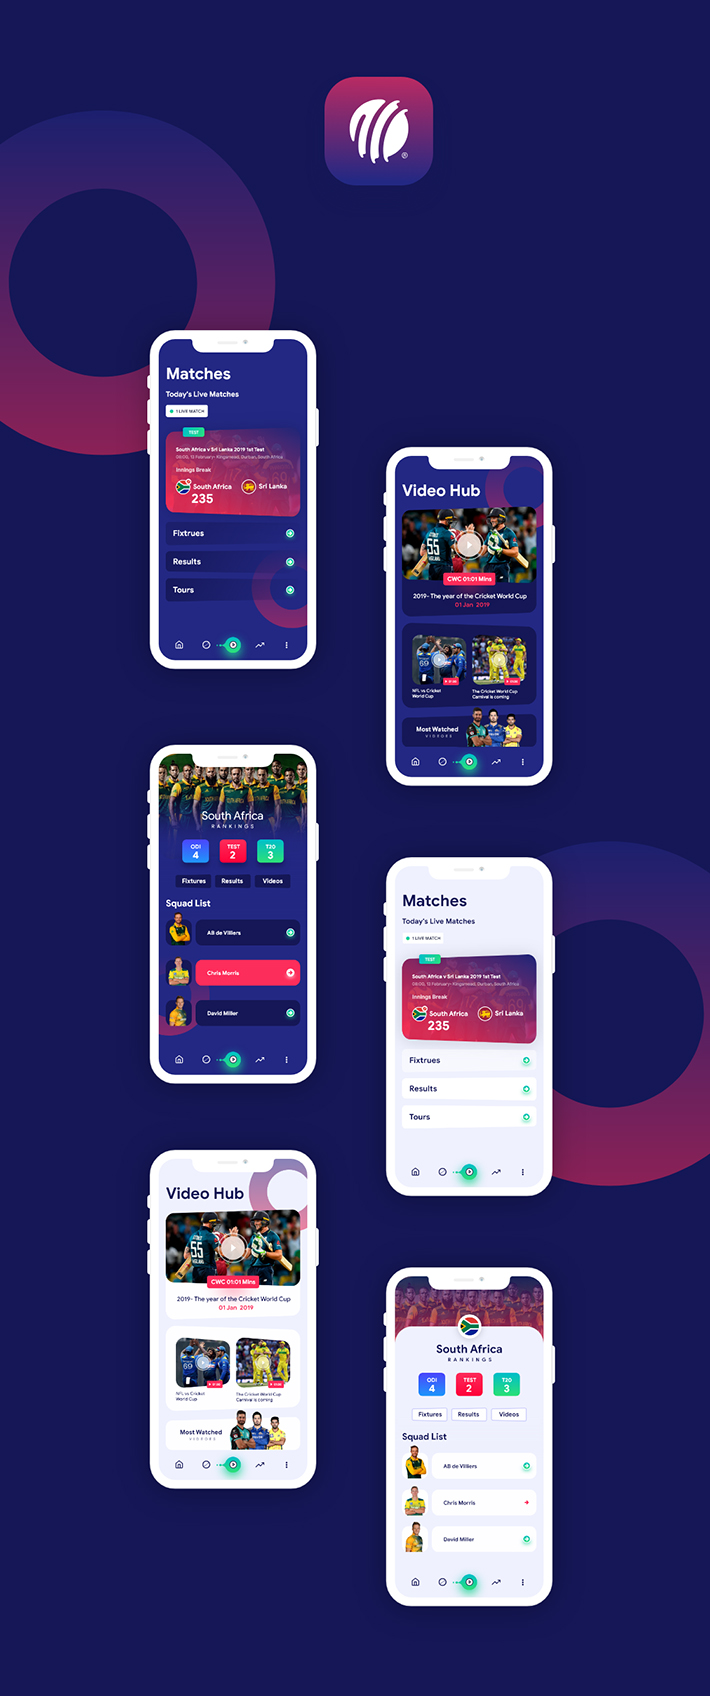 Awesome Icc Cricket App Design